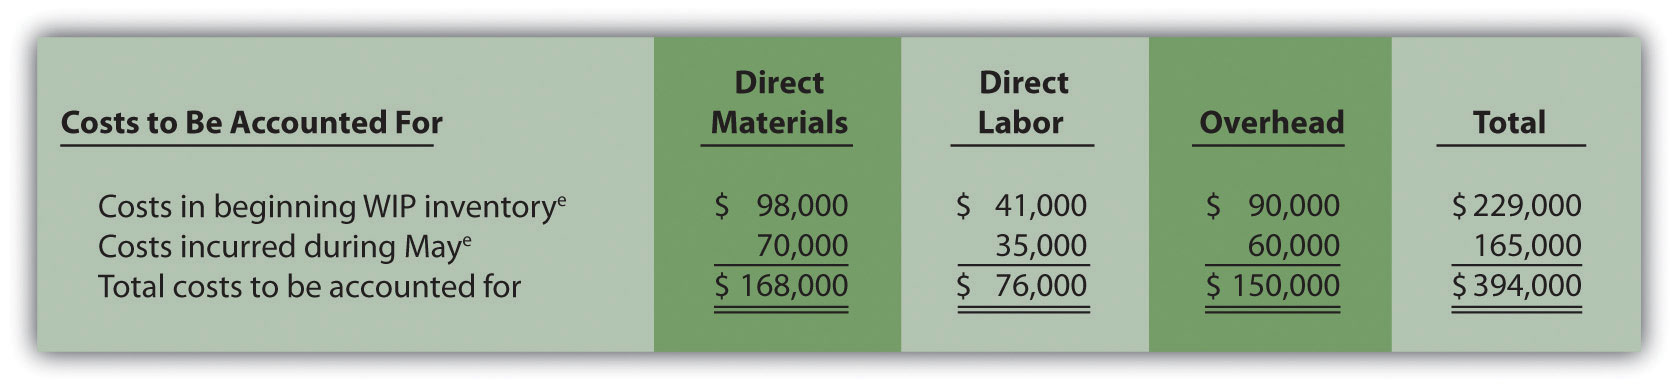 Weighted Average Method of Material Costing